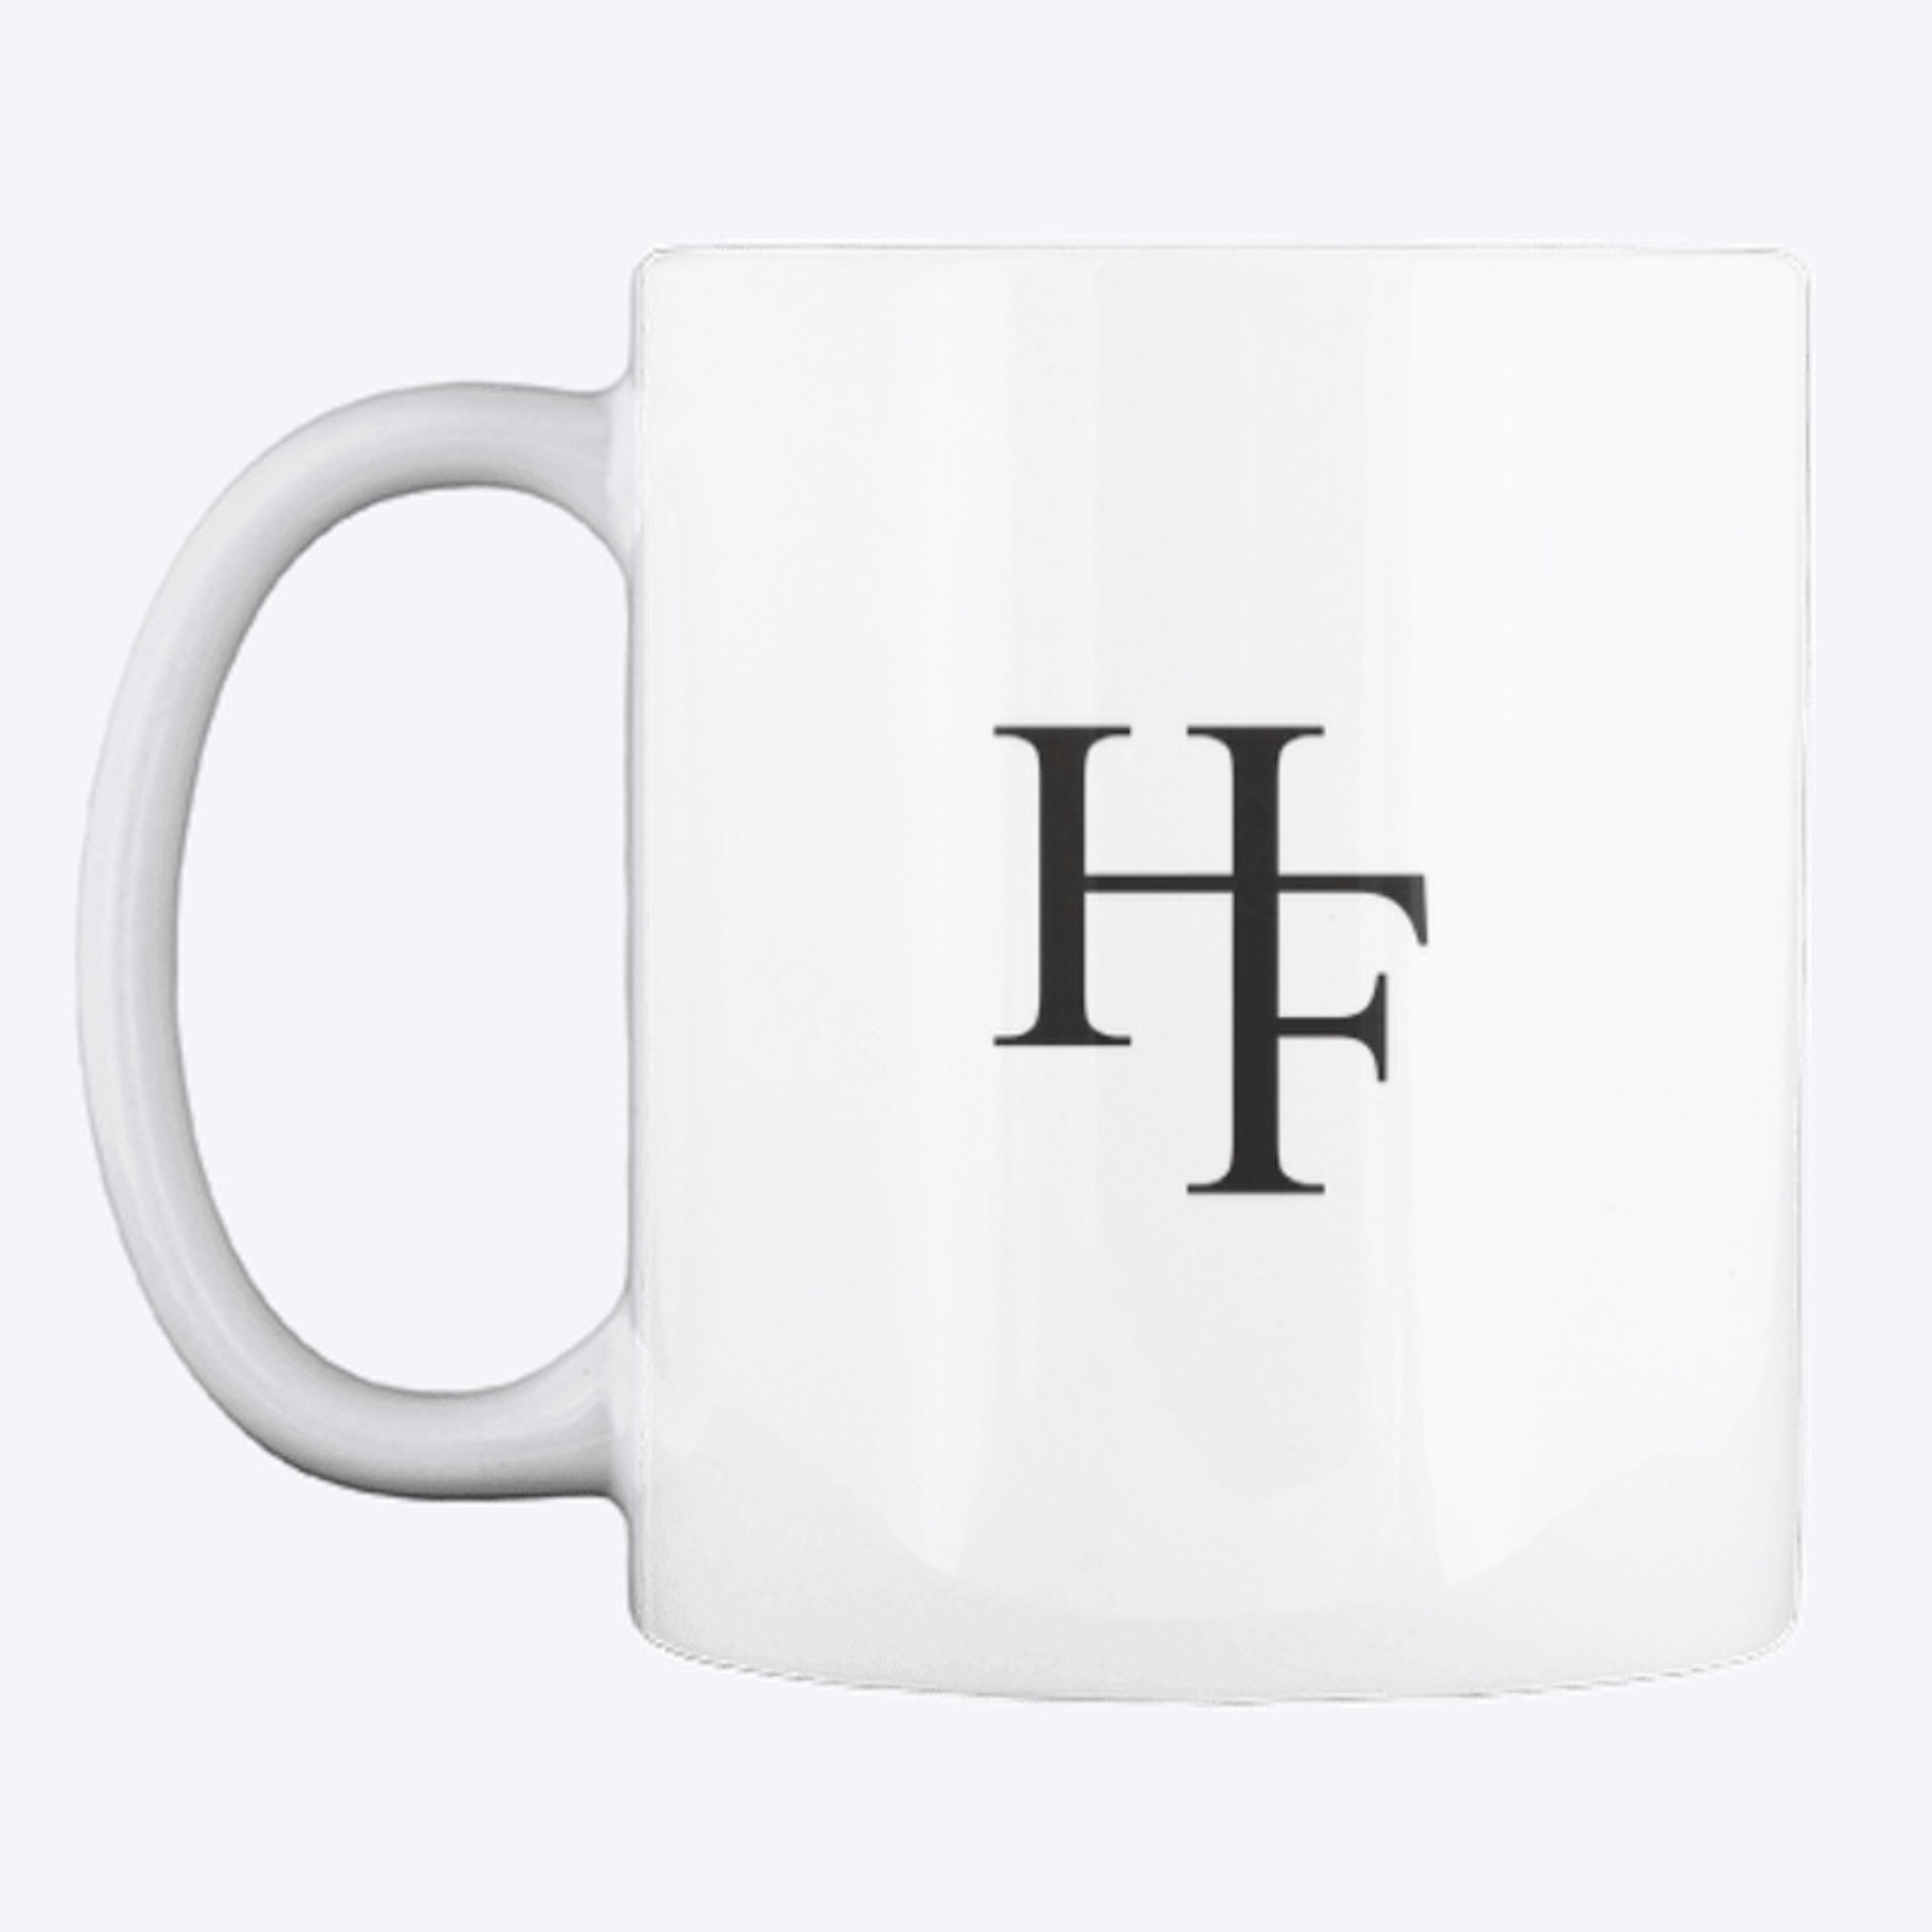 H F Logo only (No writing)